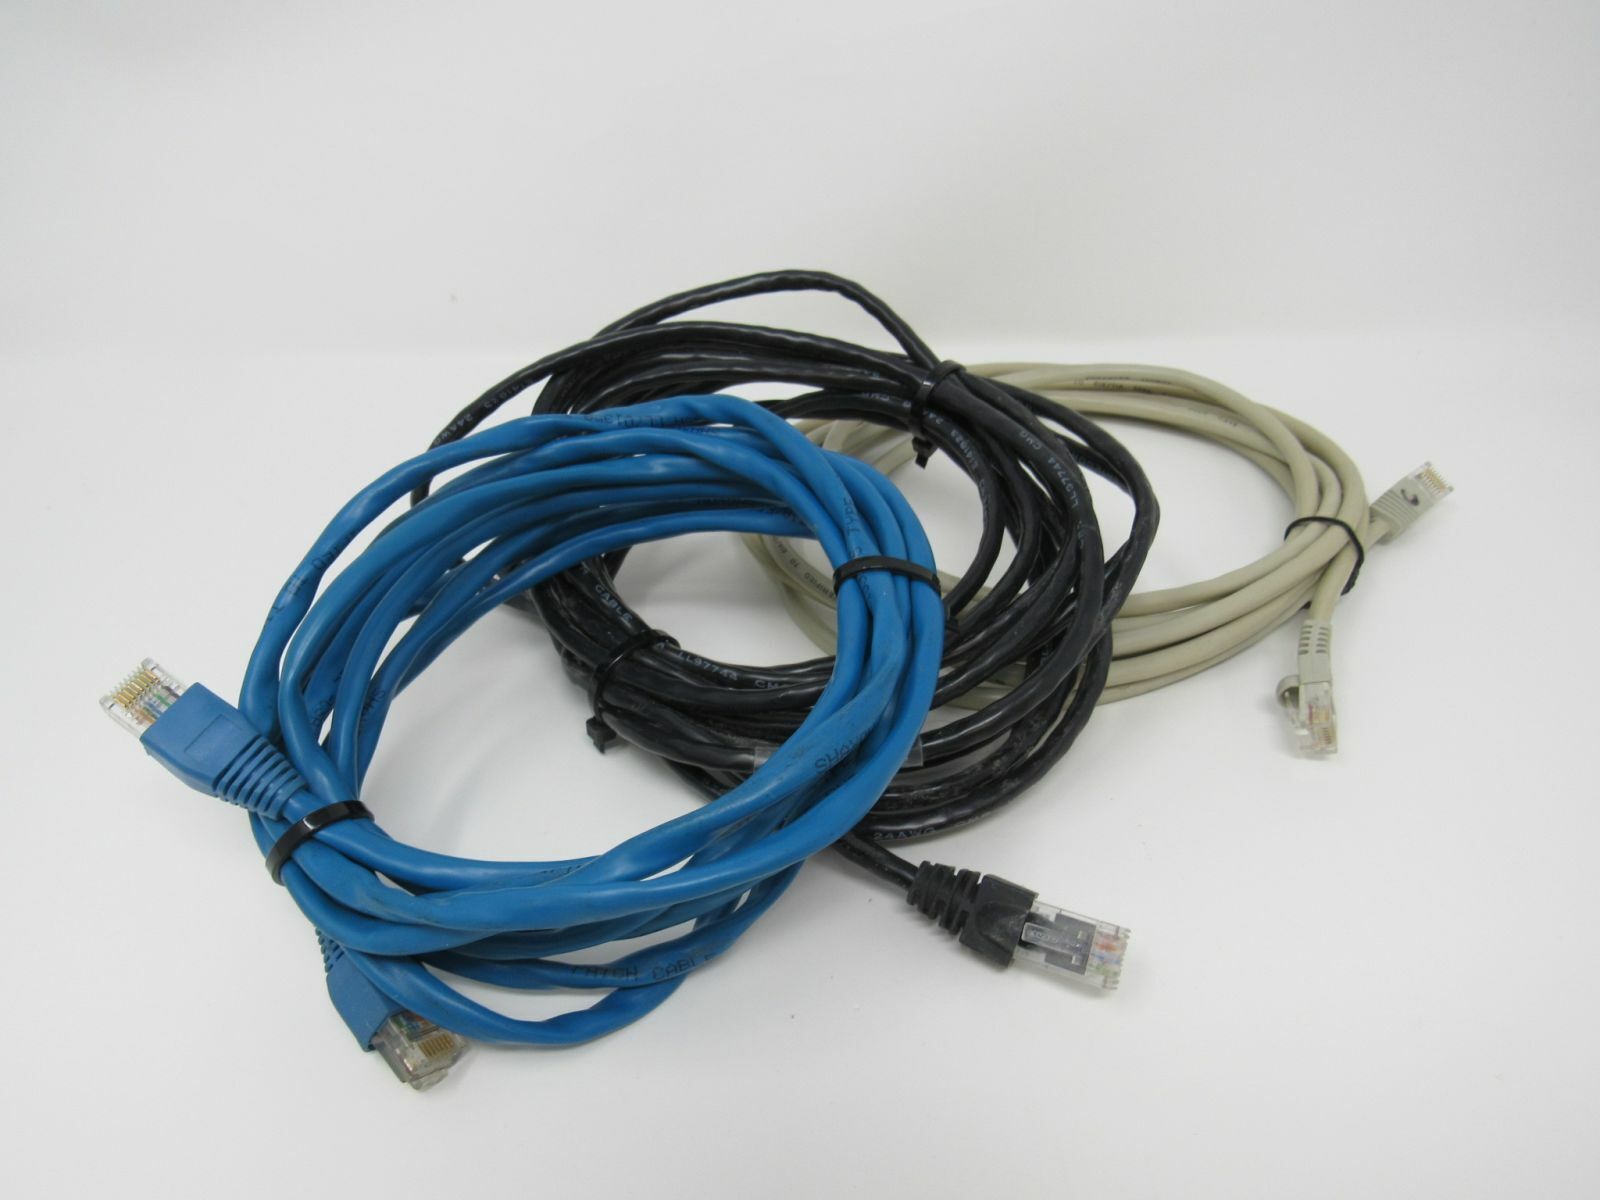 Standard Lot of 3 Ethernet Patch Cables RJ-45 Variety of Lengths Cat5e